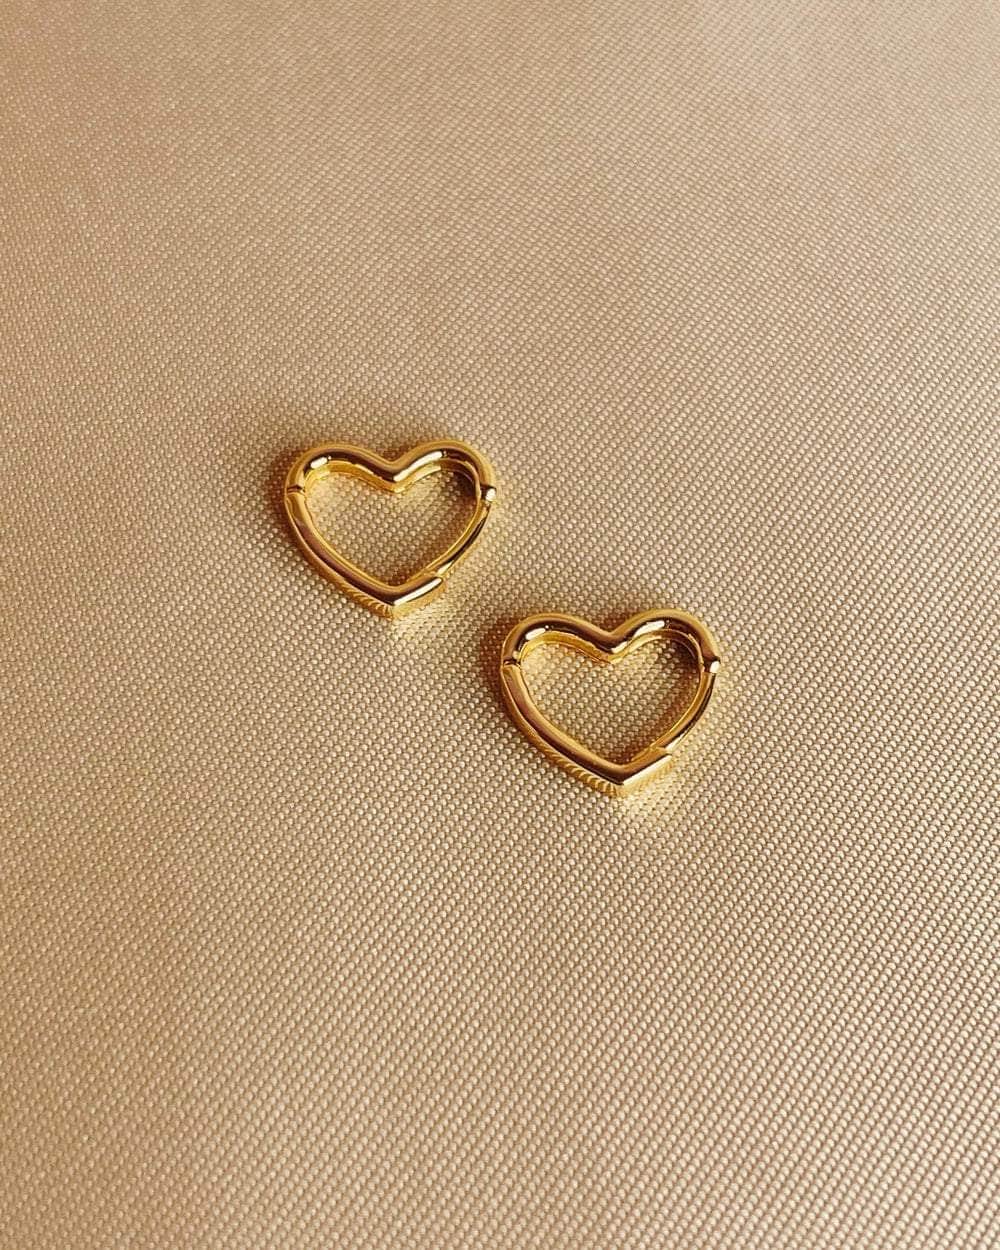 So Dainty Co. Huggies / Hoops Aimee Gold Huggies Gold Plated 925 Sterling Silver Jewelry